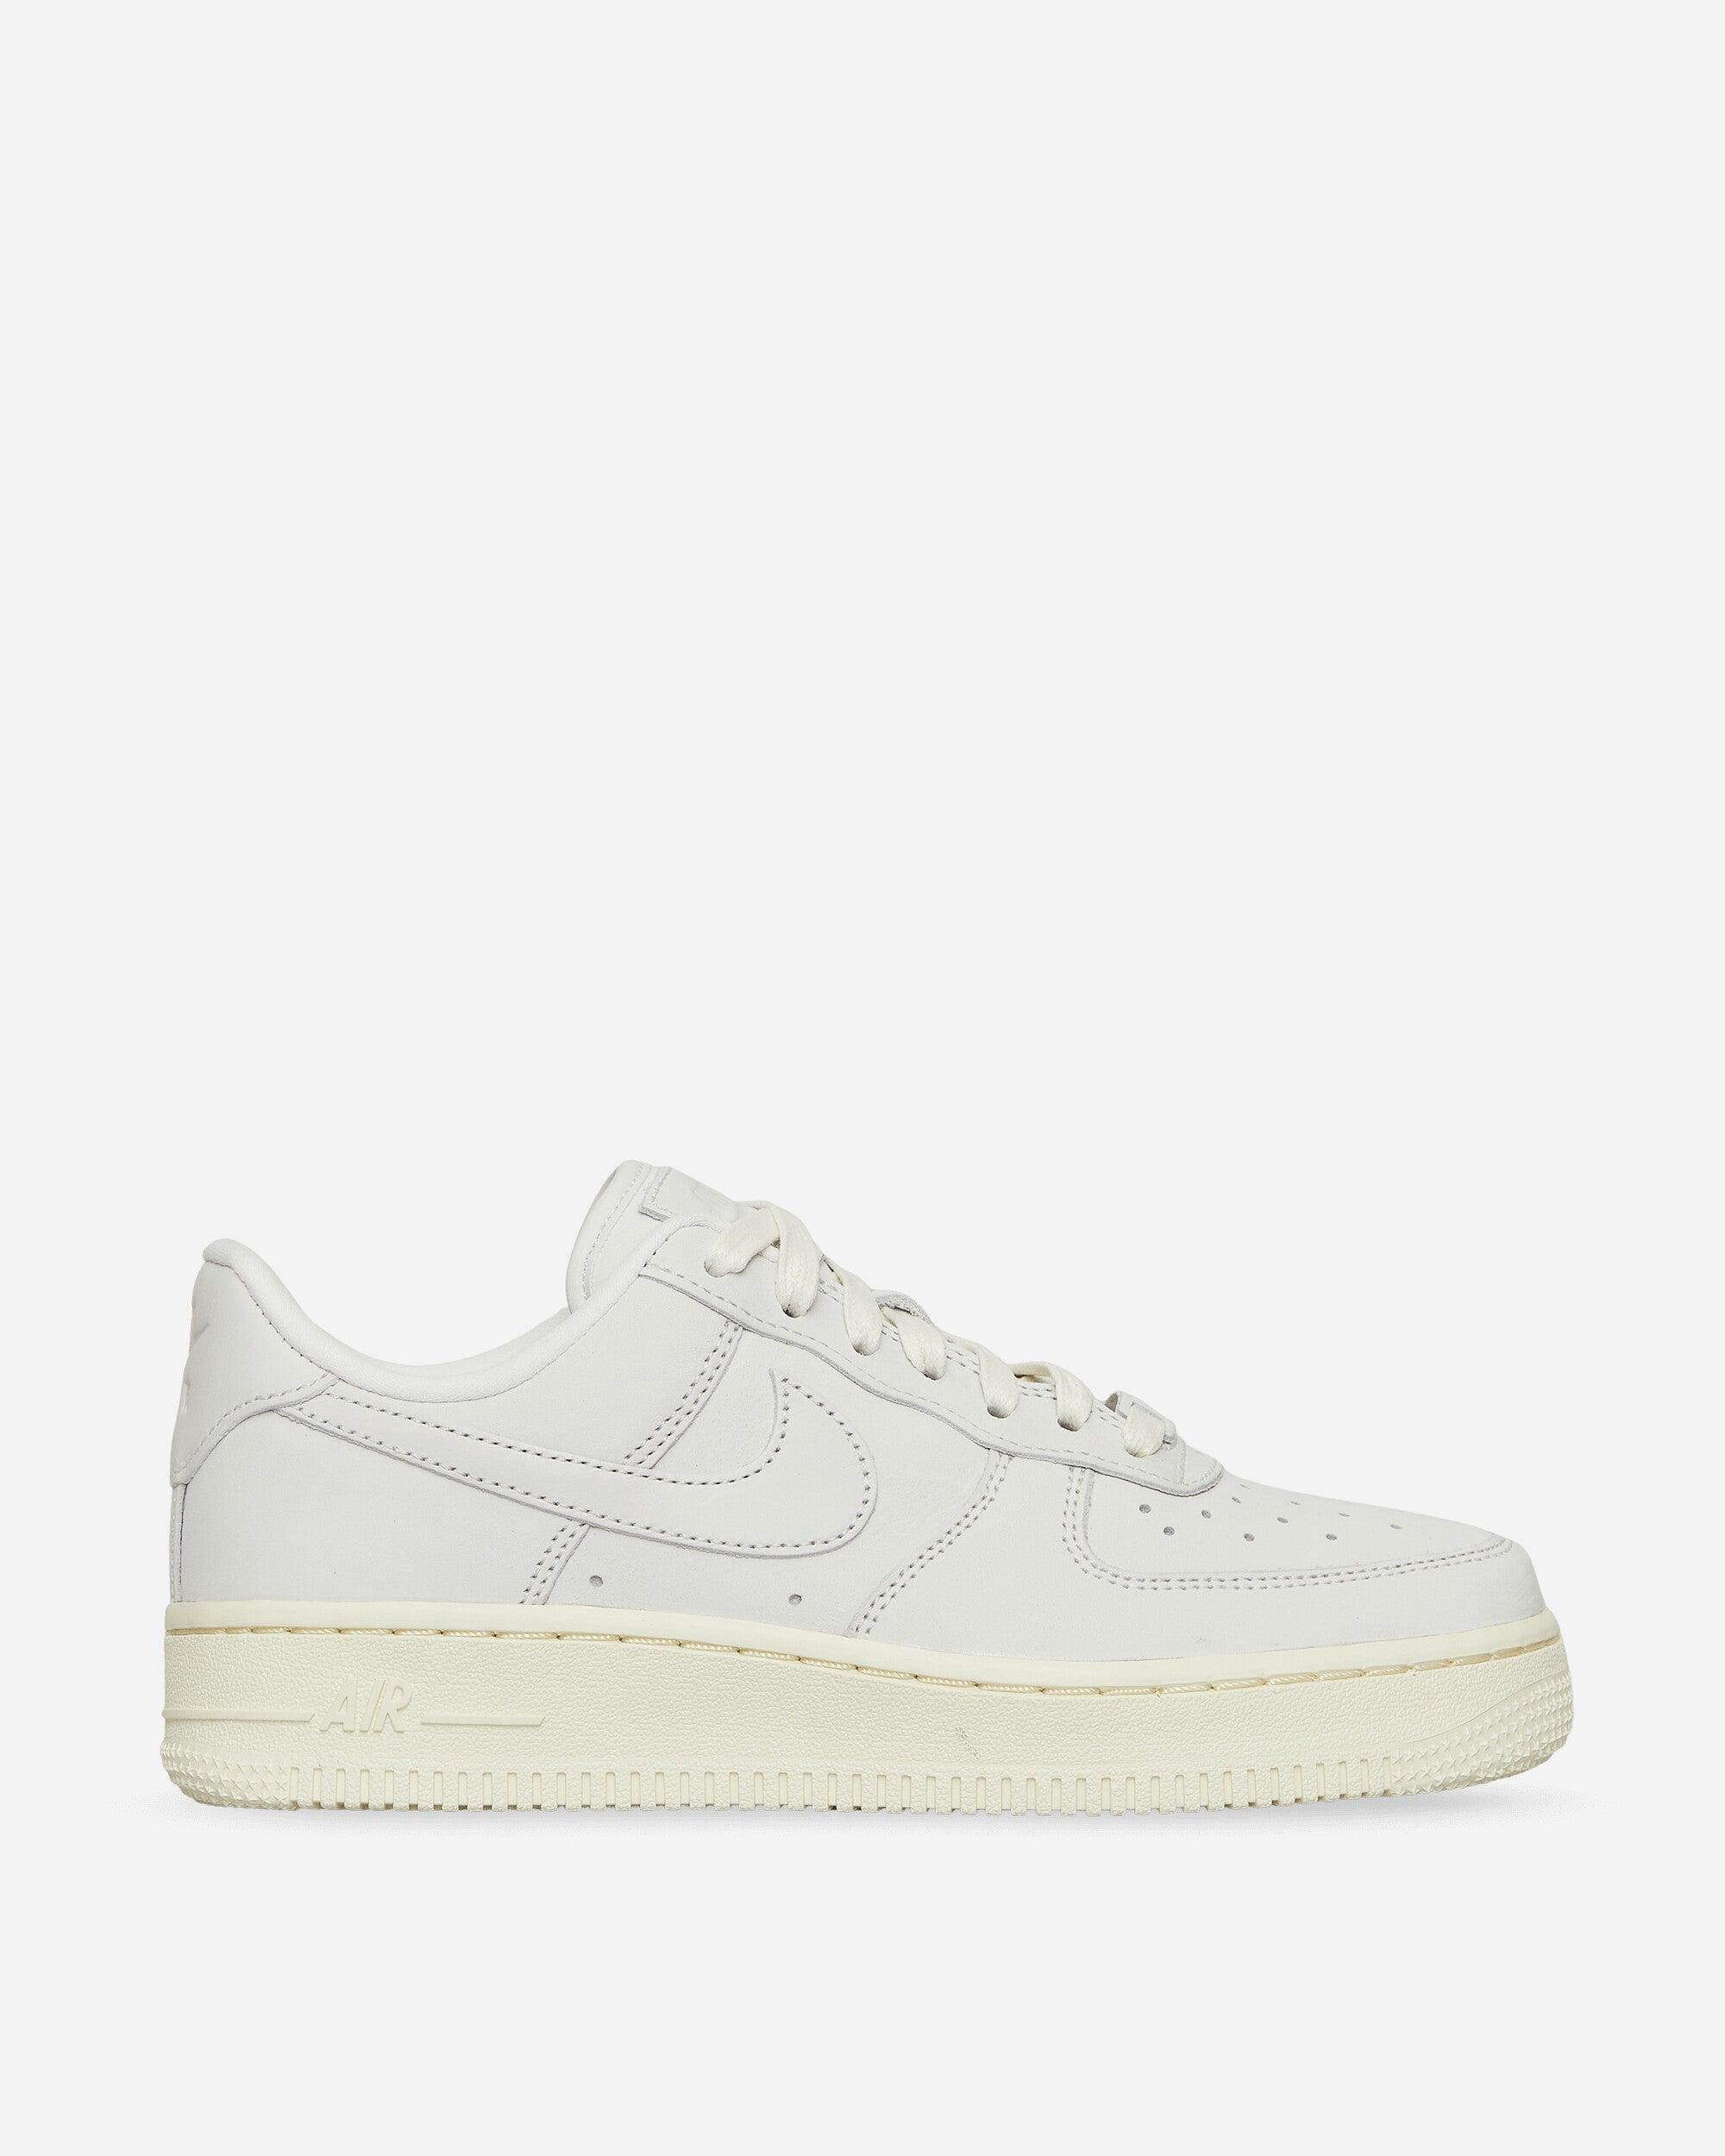 Nike Wmns Air Force 1 Low Premium Sneaker Summit White | Lyst